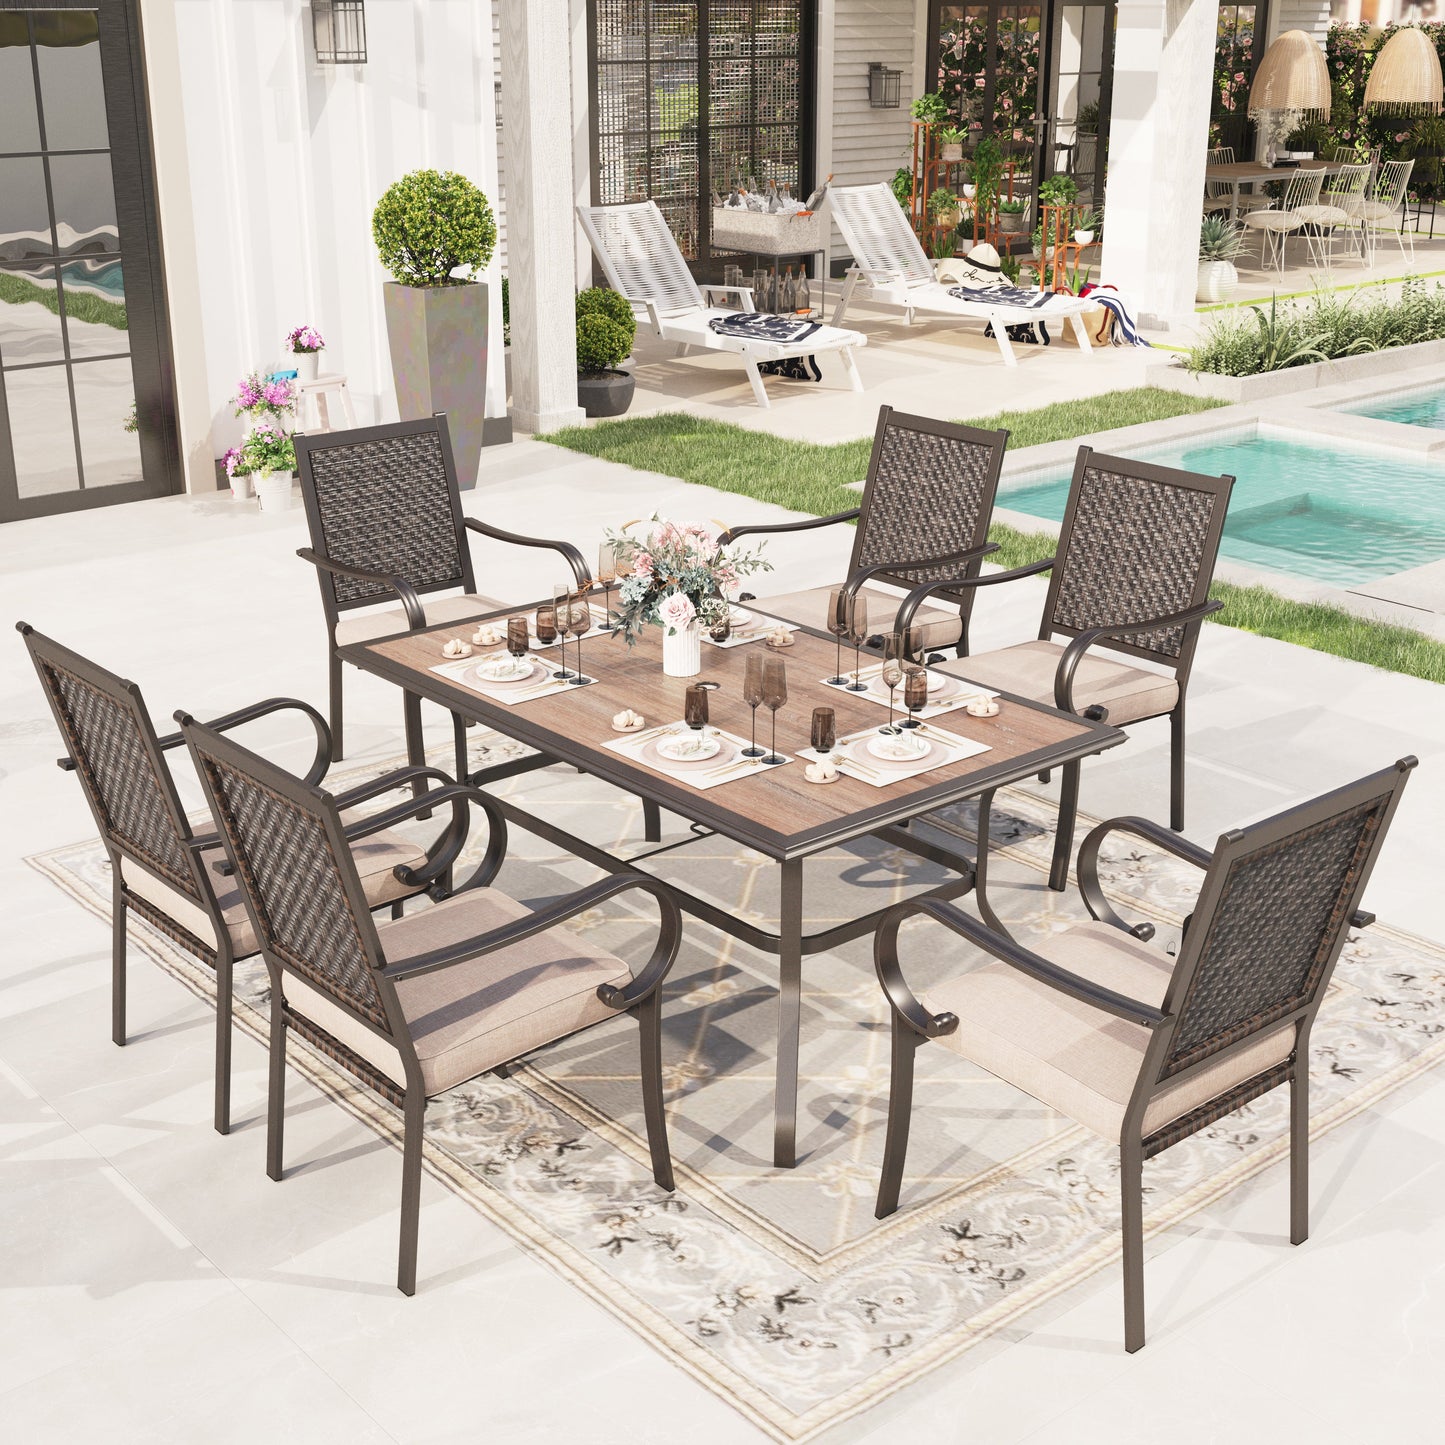 Sophia & William 7 Pieces Patio Dining Table and Chairs Set Outdoor Rattan Cushioned Chairs and Rectangle Metal Table for 6 person